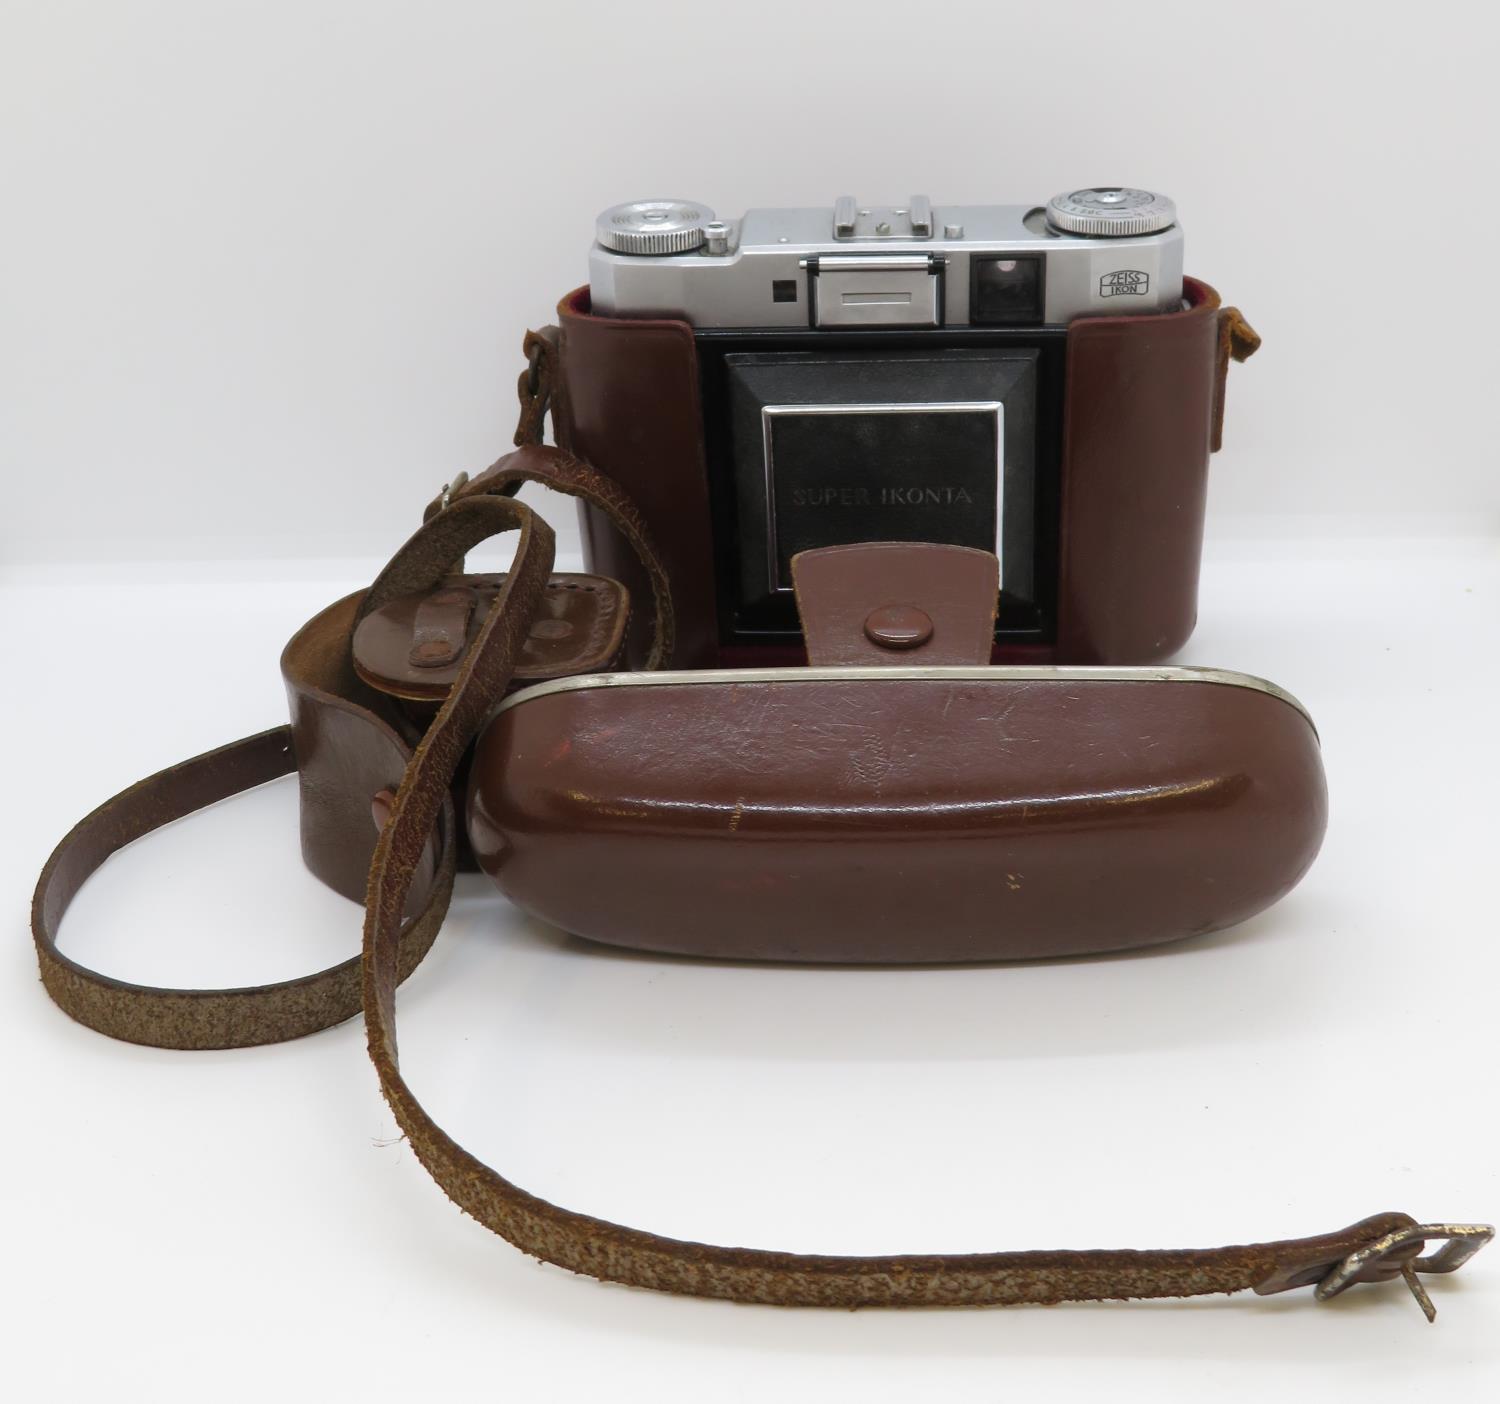 Zeiss Ikon Super Ikonta camera with box, strap and lens